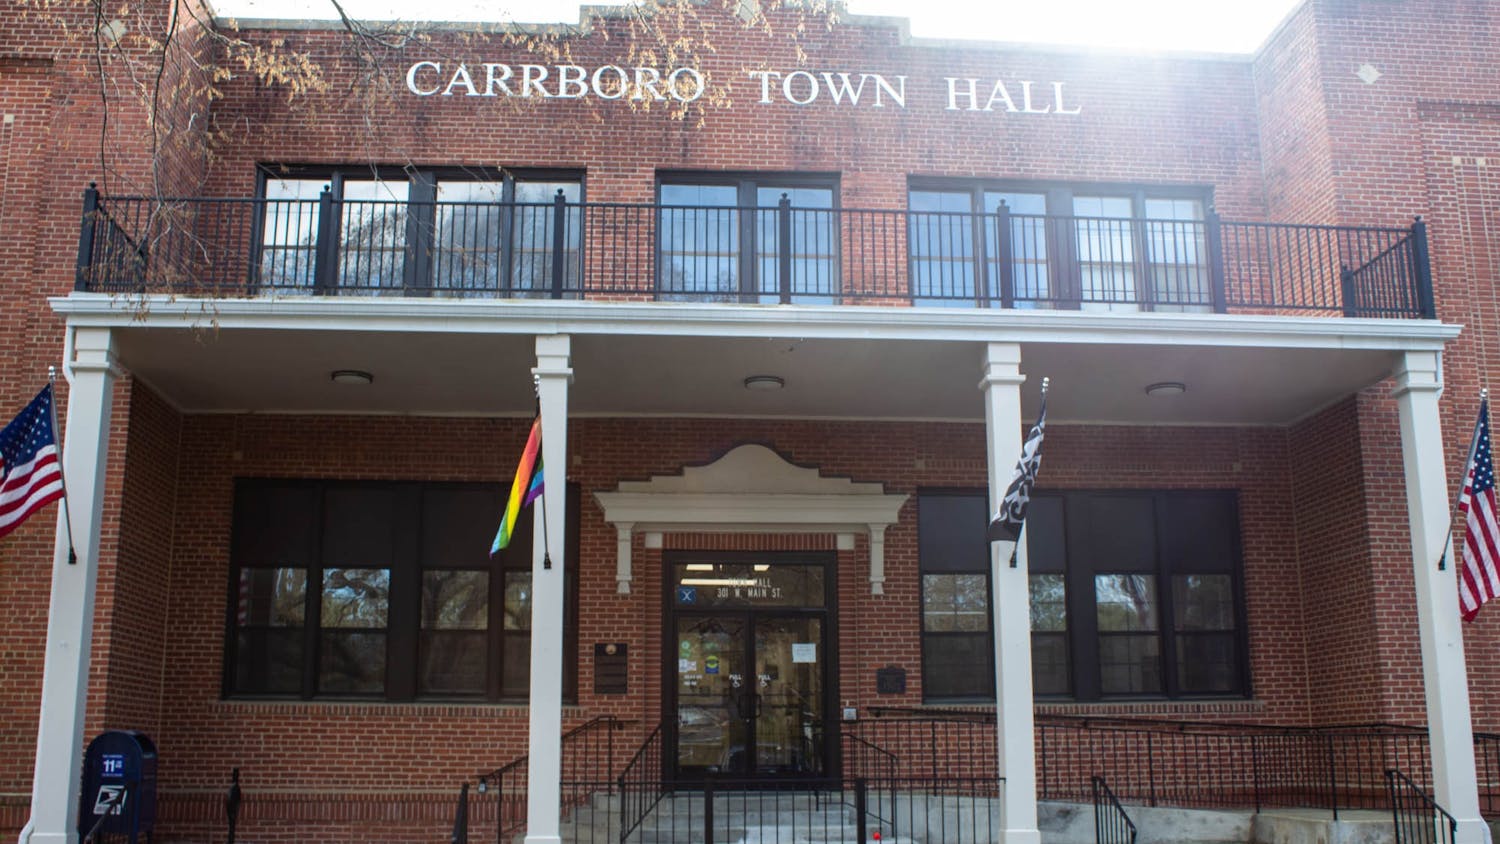 20230327_Garcia_city-carrboro-assistant-town-manager-feature-3.jpg